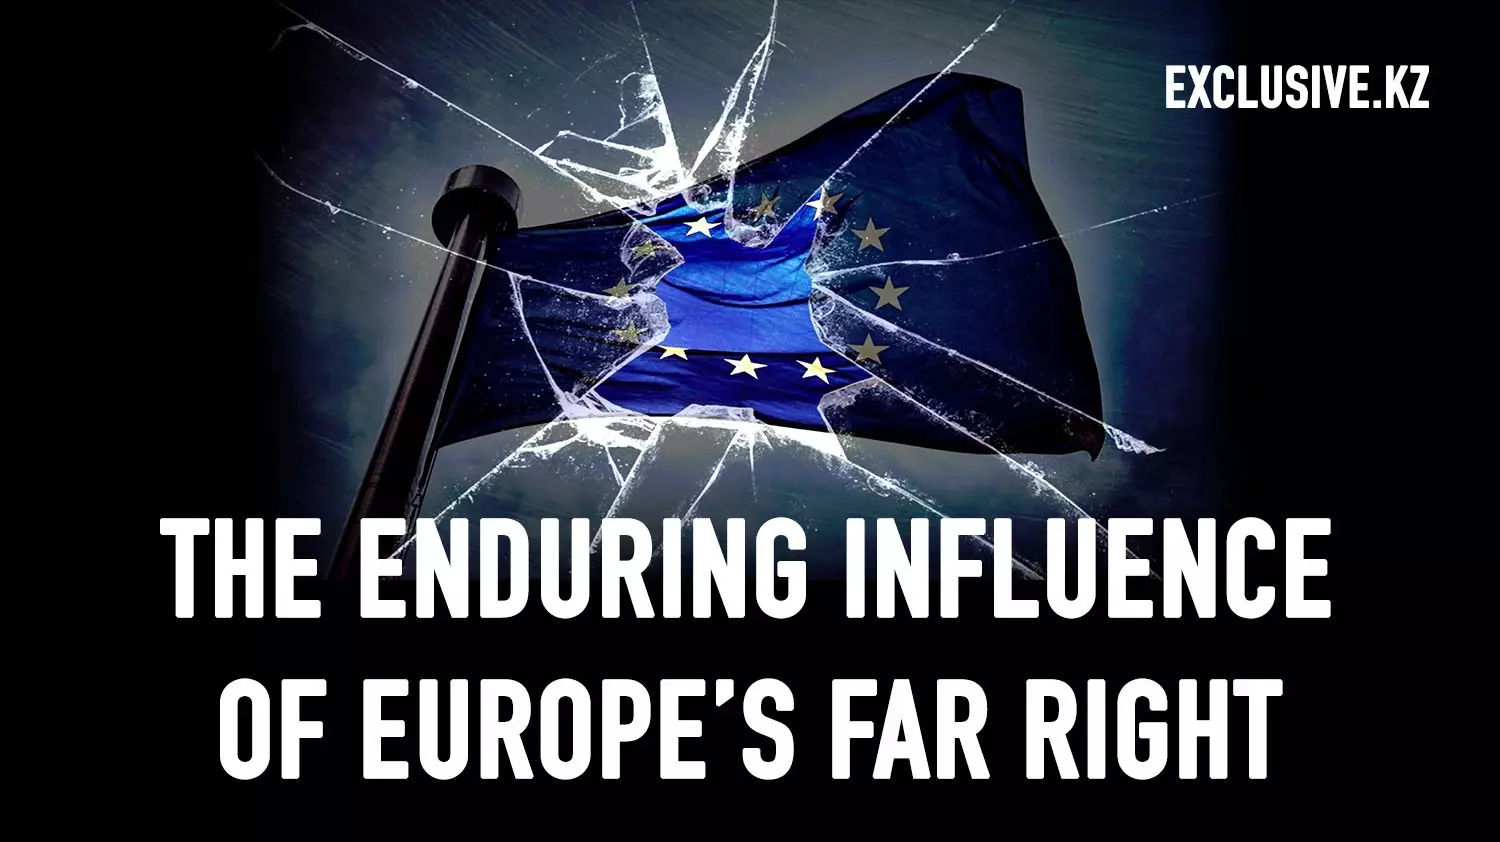 Will far-right anti-European parties unite to destroy the European Union from within?